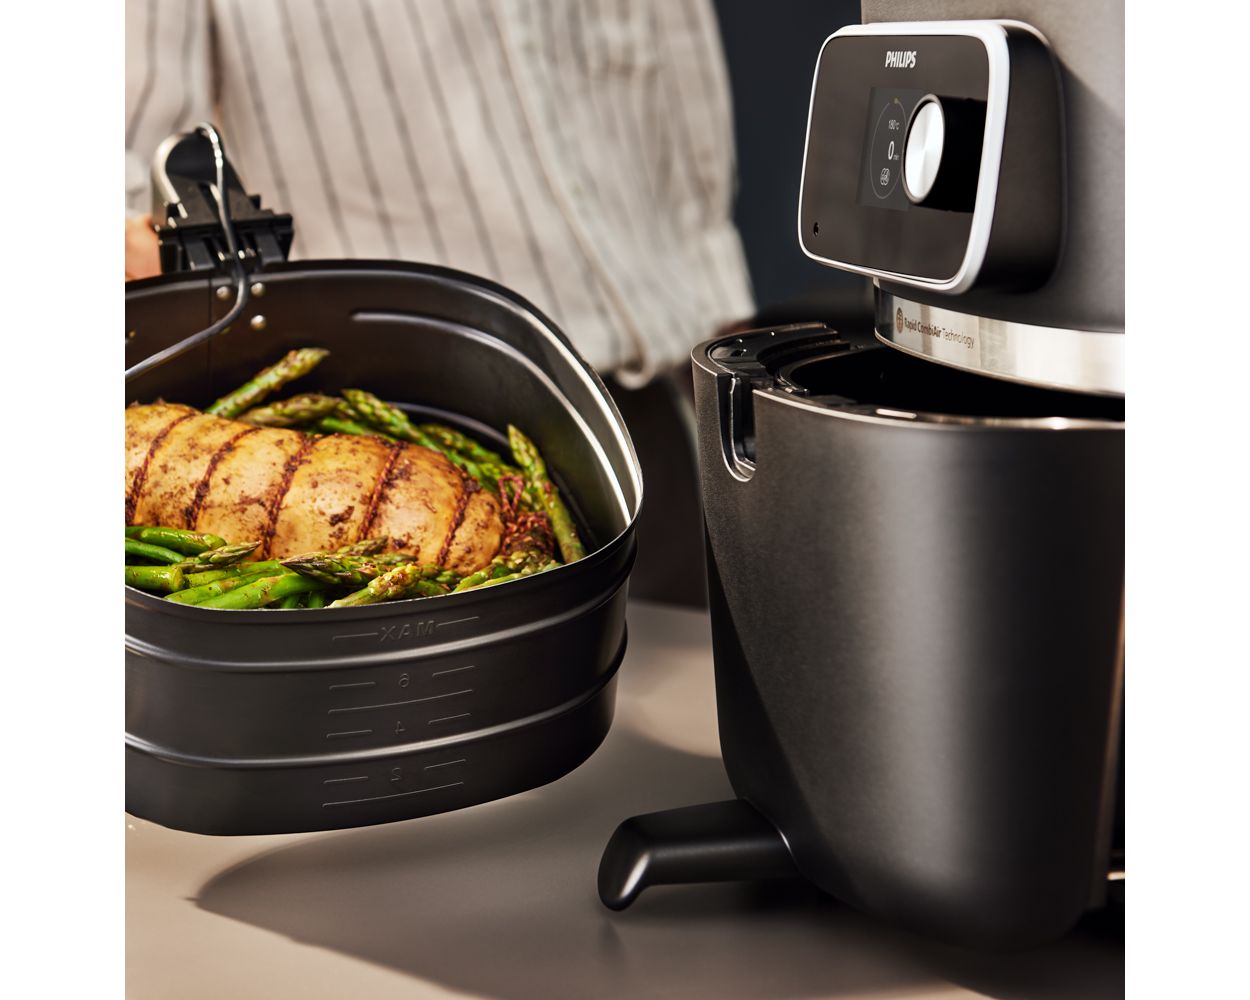 CombiAir HD9880/90 | Philips Series Connected Rapid 7000 XXL Airfryer